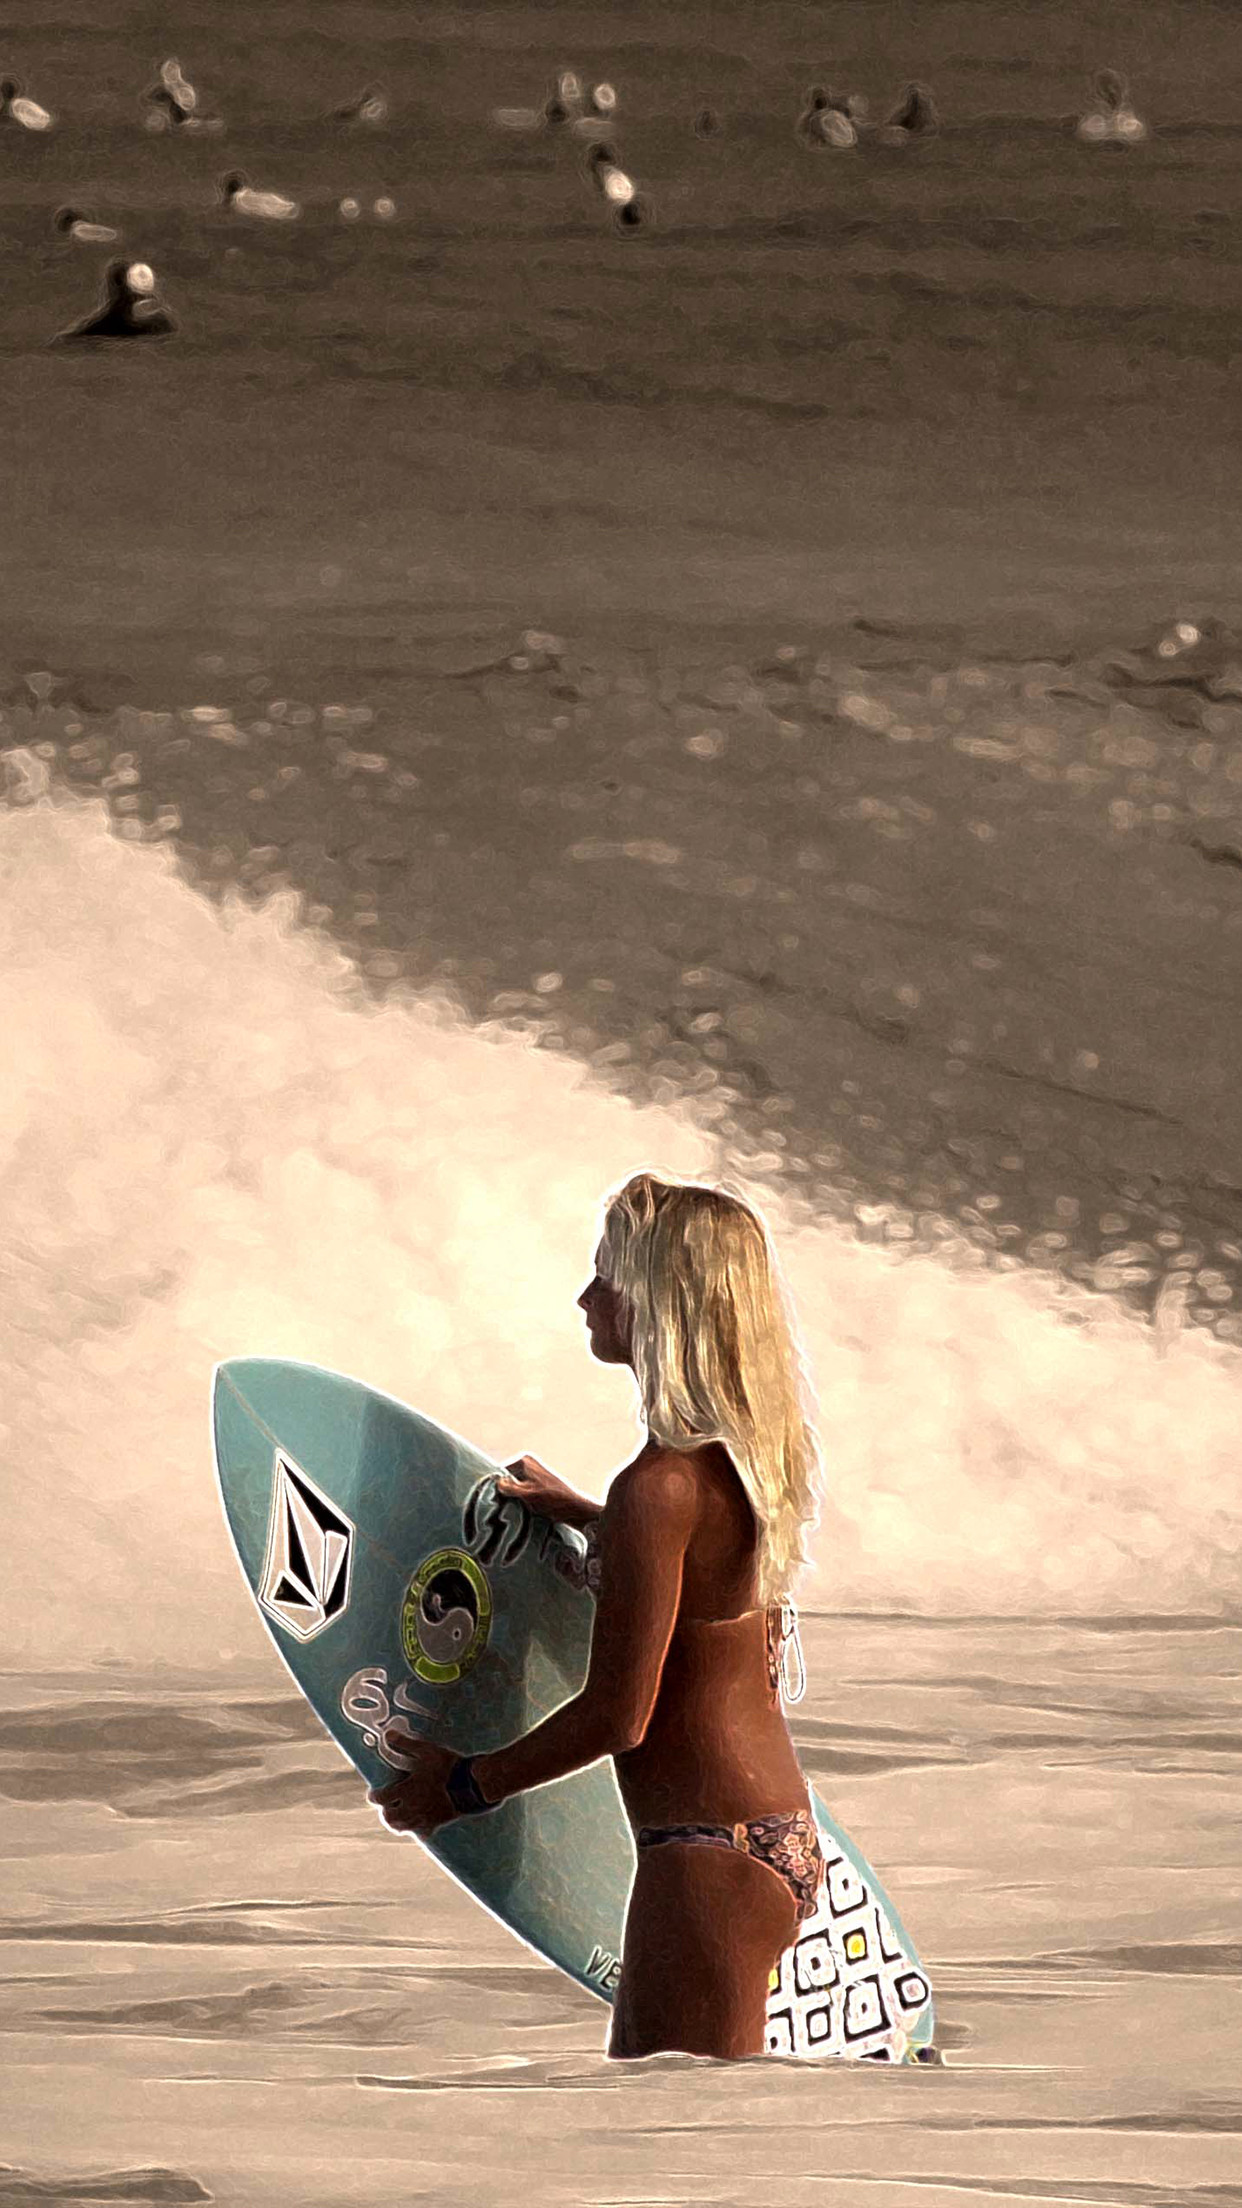 Surfing-Girl-iPhone-Parallax-3Wallpapers